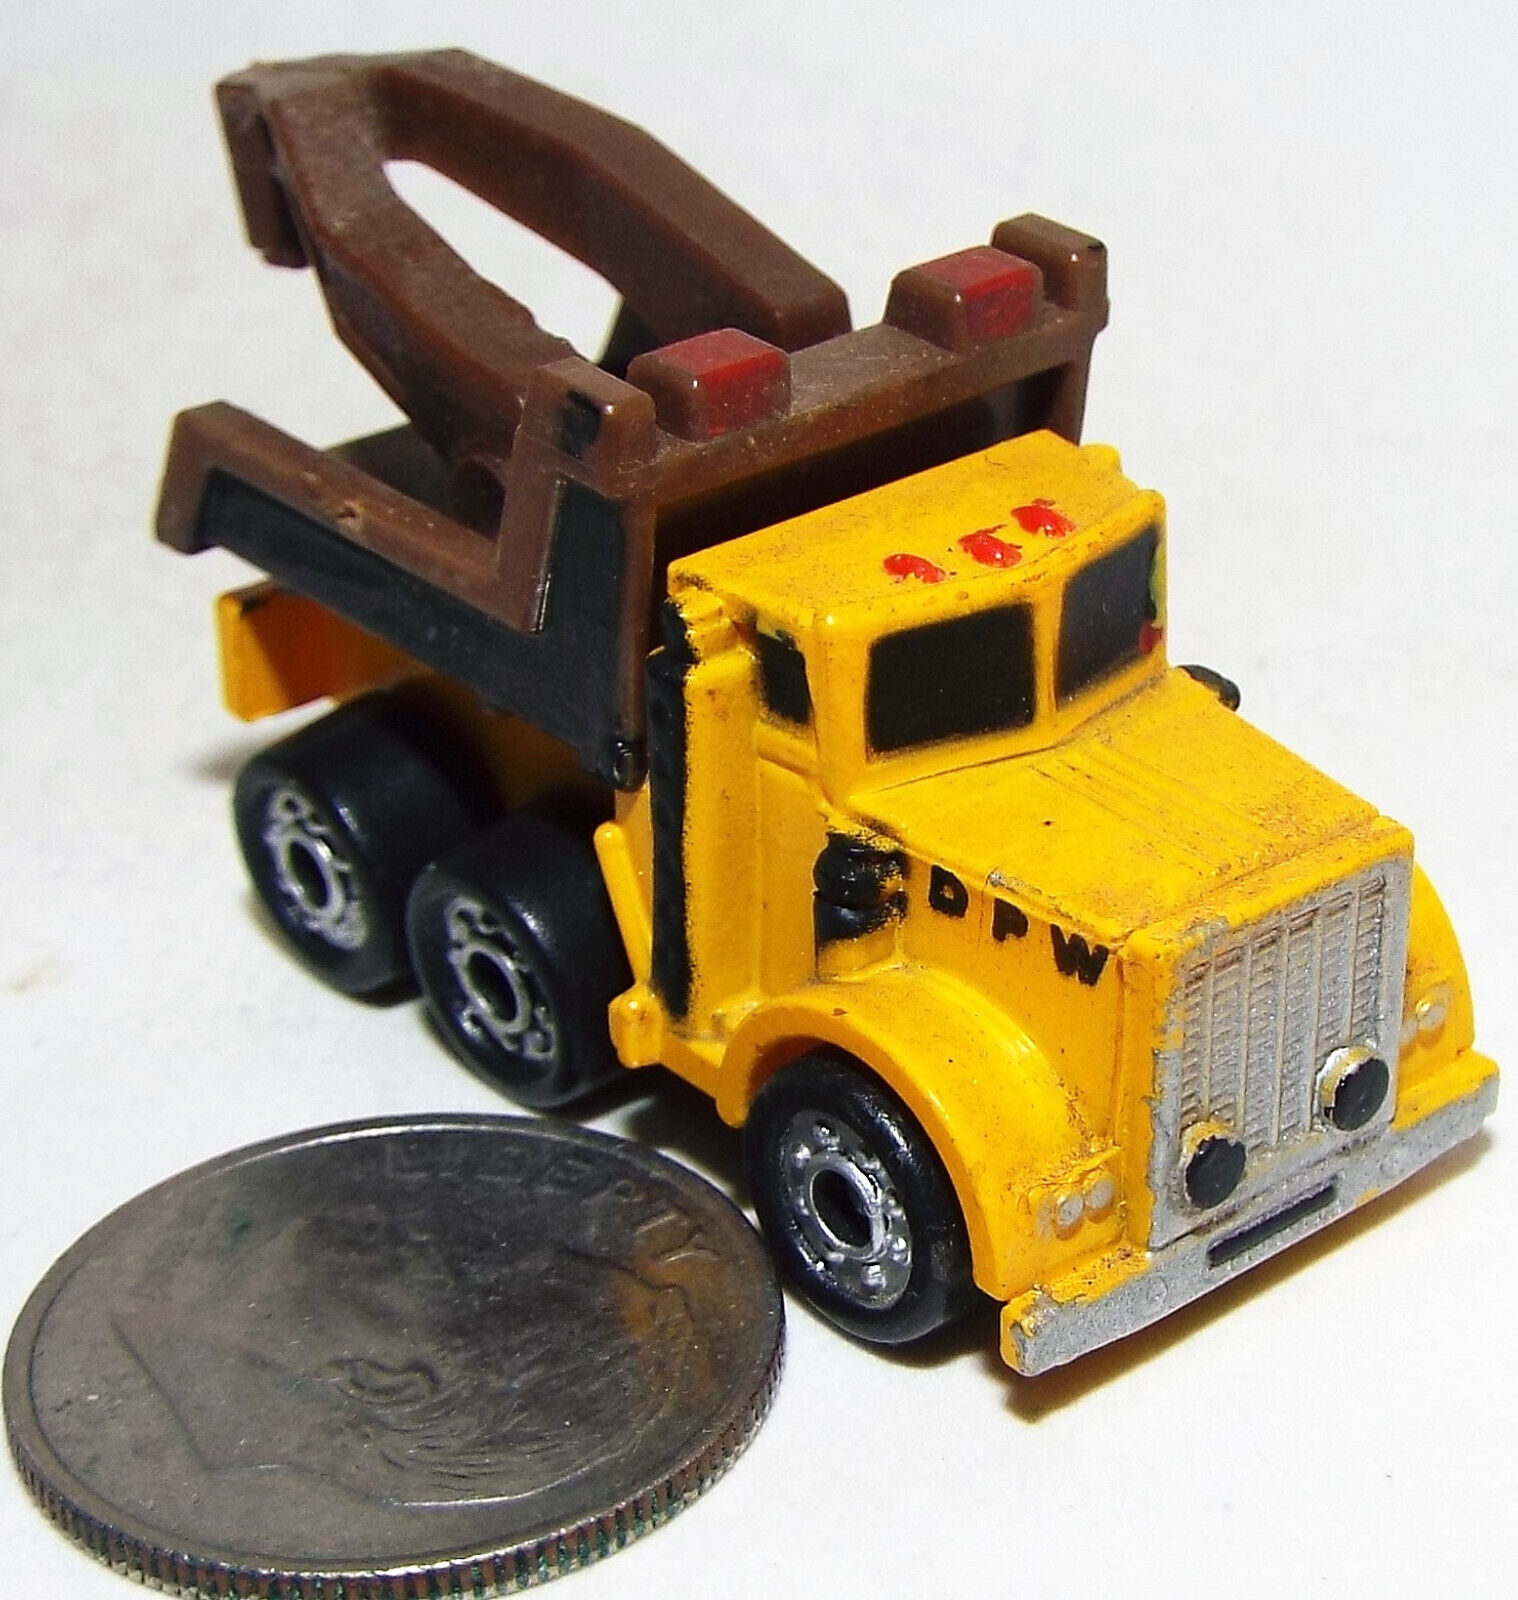 Small Funrise Heavt Duty TowTruck in Yellow and Brown marked DPW